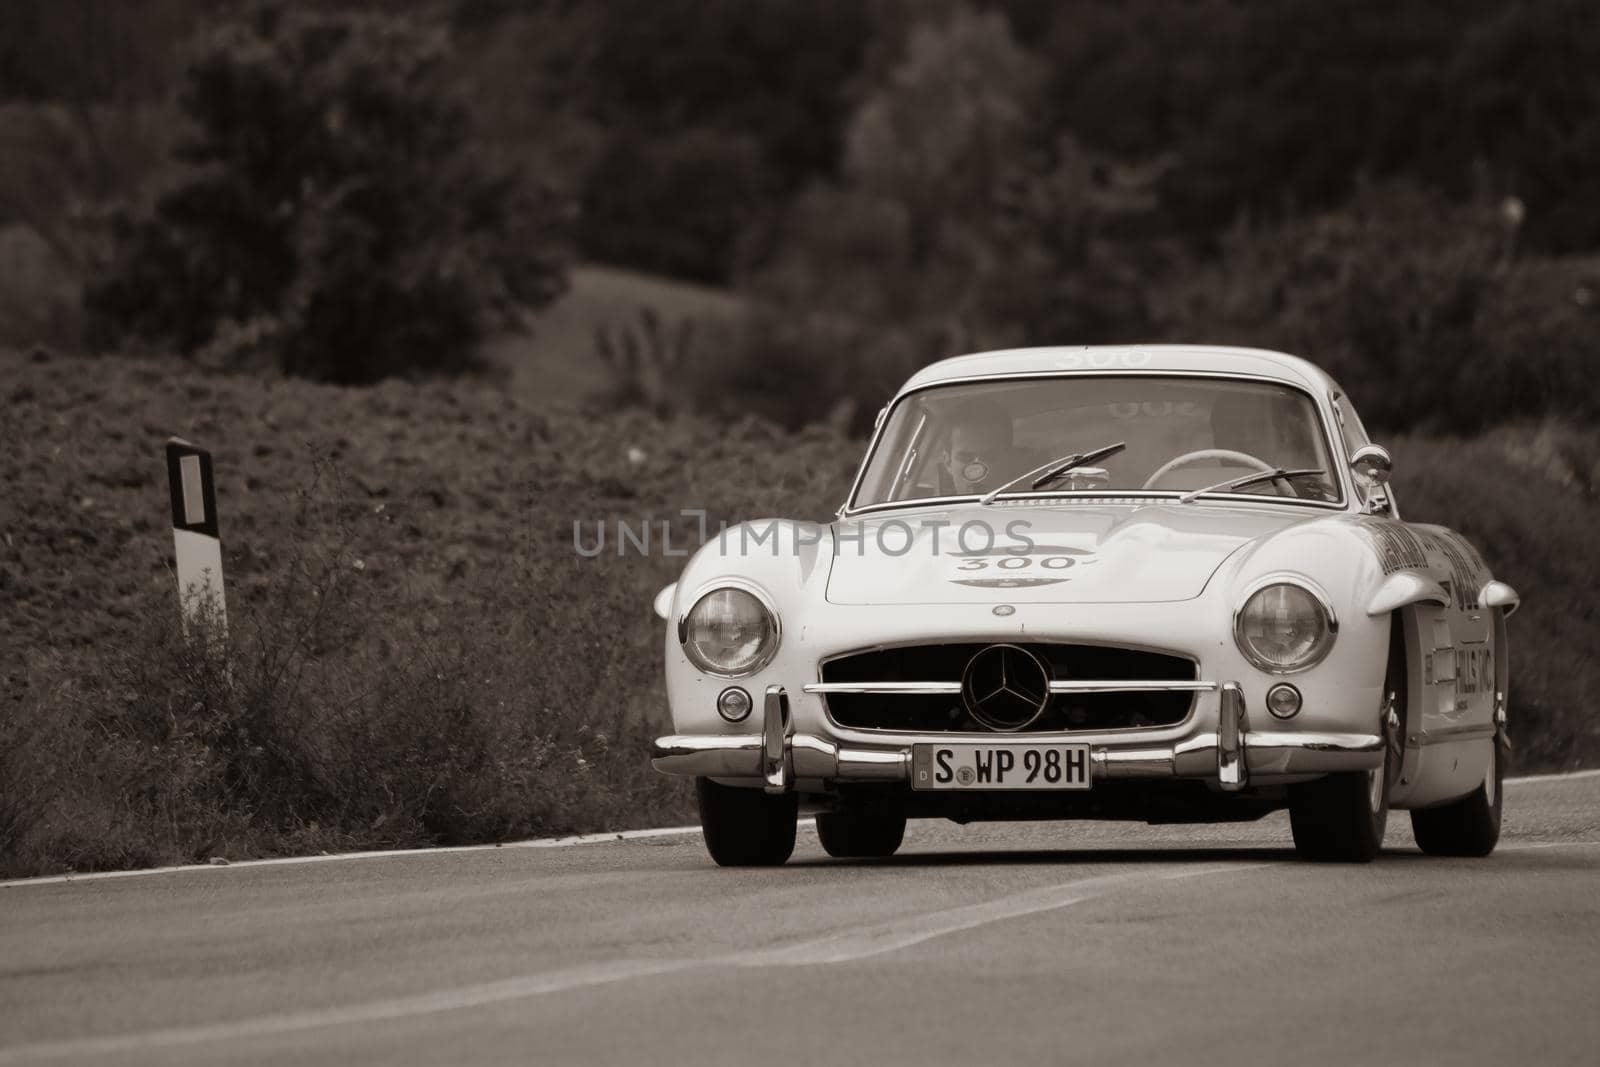 CAGLI , ITALY - OTT 24 - 2020 : MERCEDES-BENZ 300 SL W 198 1954 on an old racing car in rally Mille Miglia 2020 the famous italian historical race (1927-1957)